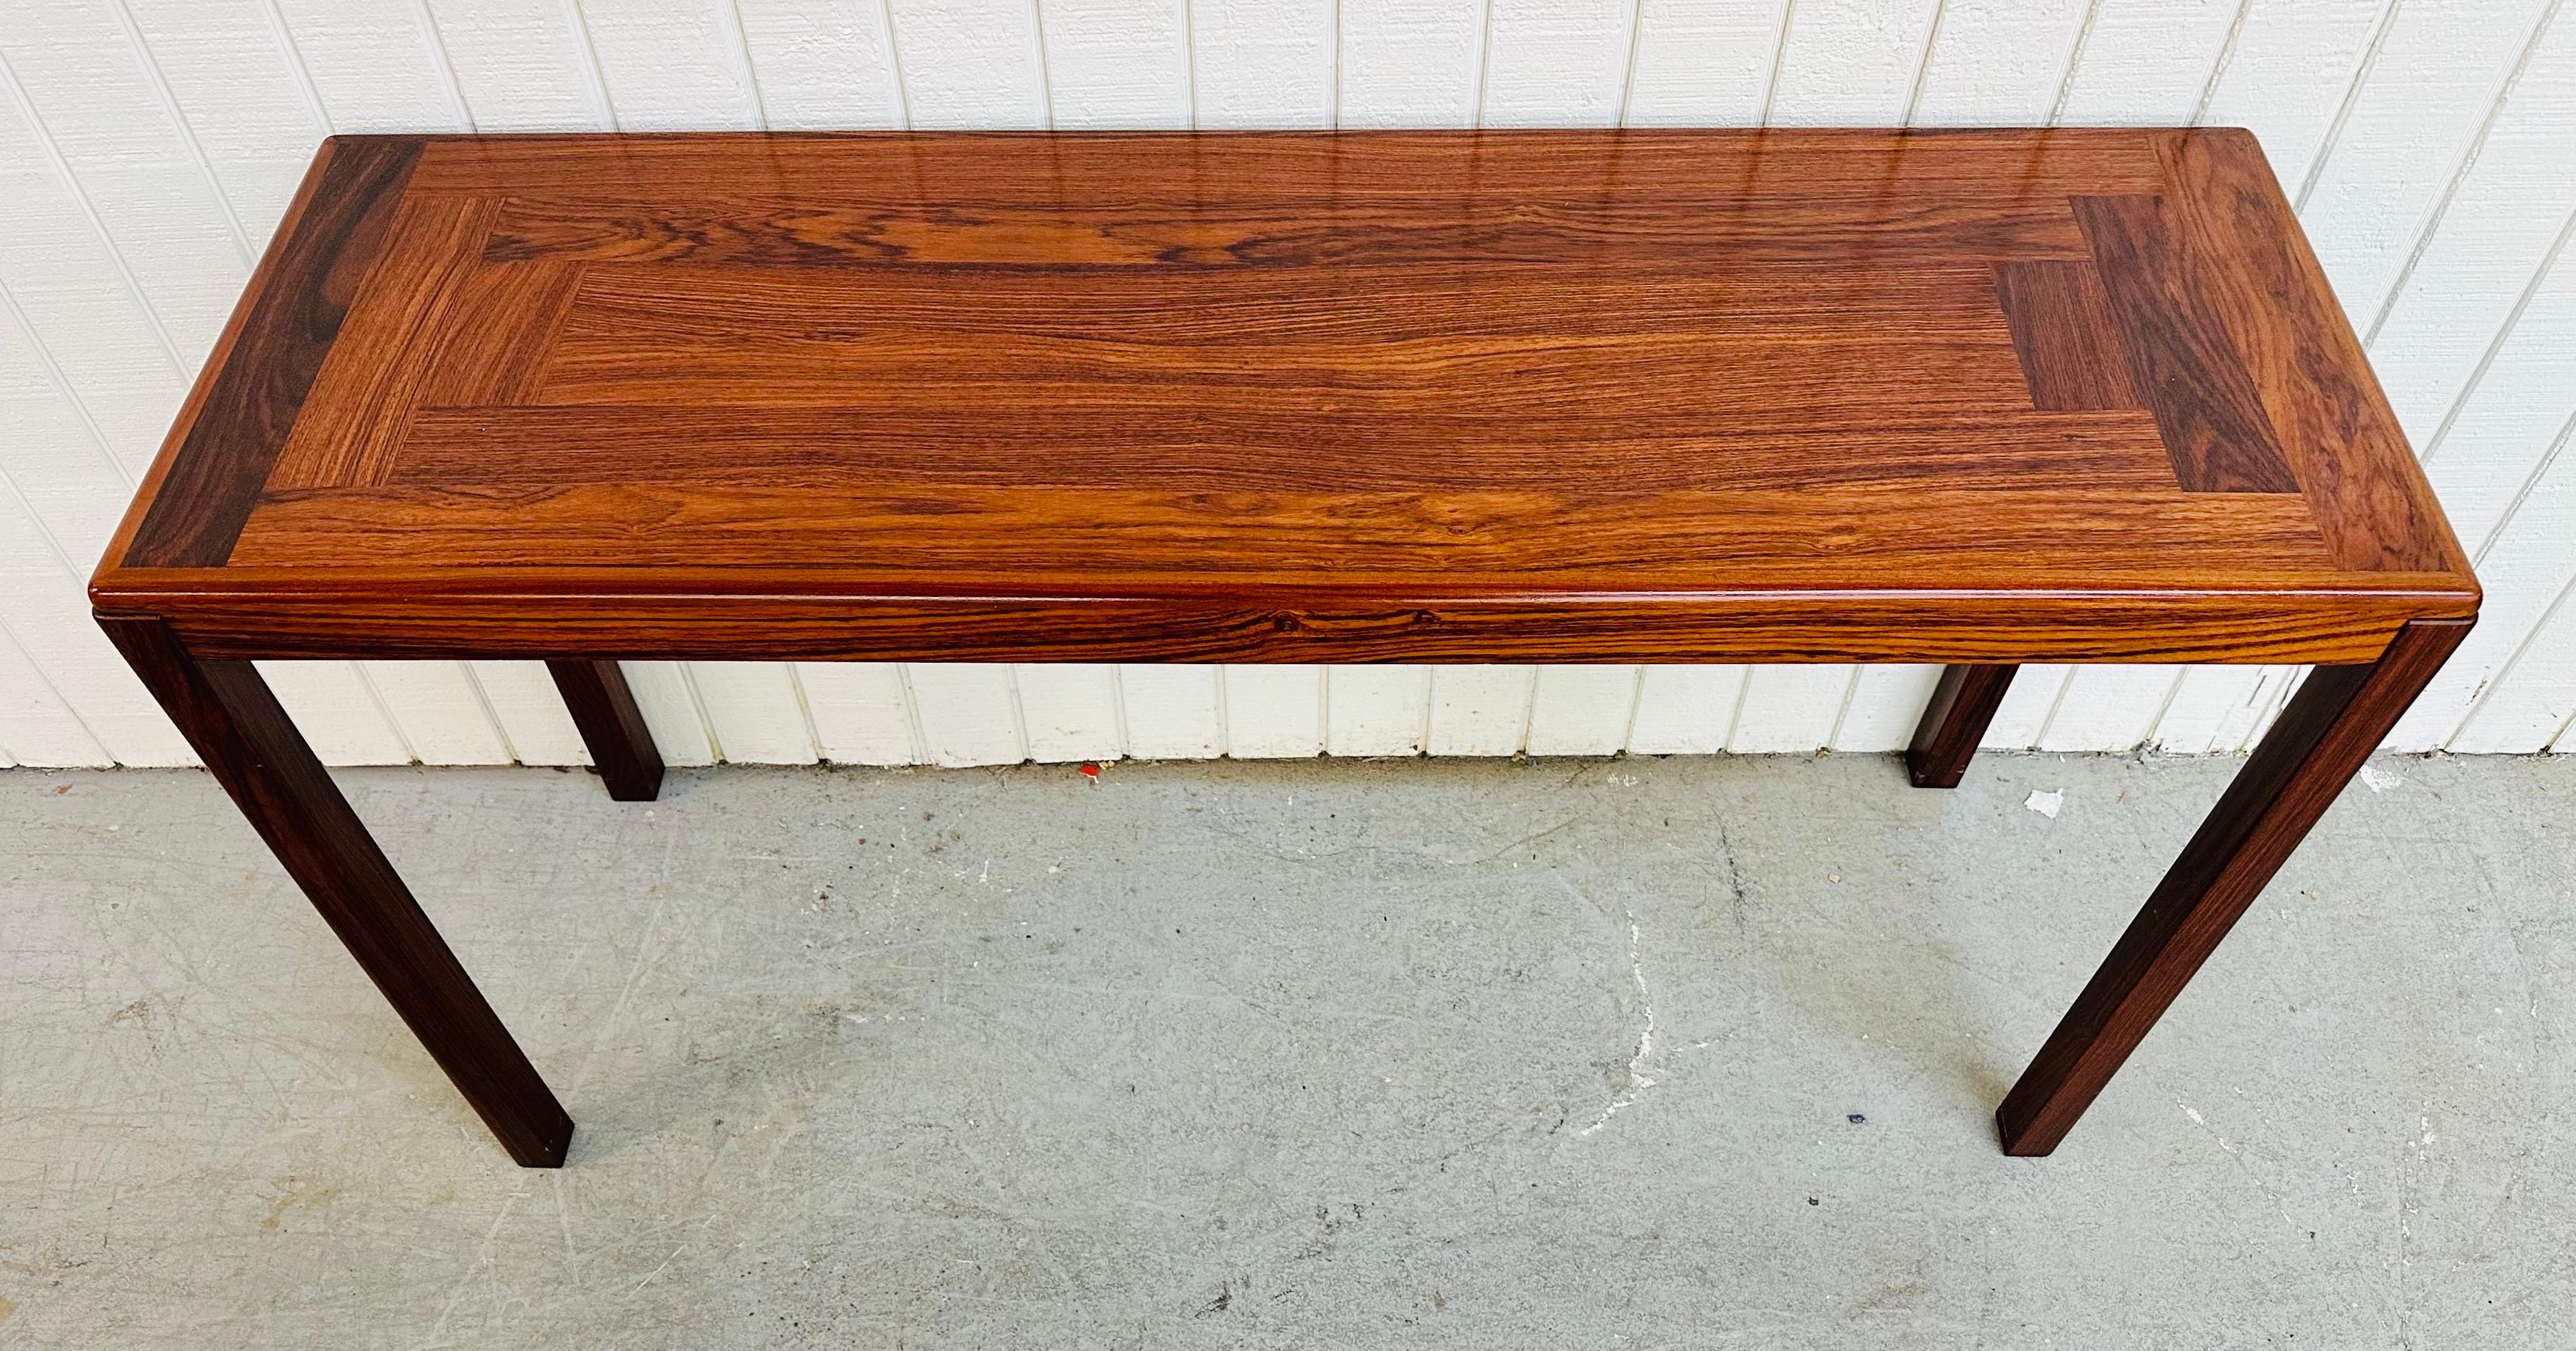 This listing is for a vintage Danish Modern Rosewood Sofa Table. Featuring a straight line design, rectangular top, four legs, and a beautiful rosewood finish. This is an exceptional combination of quality and design!